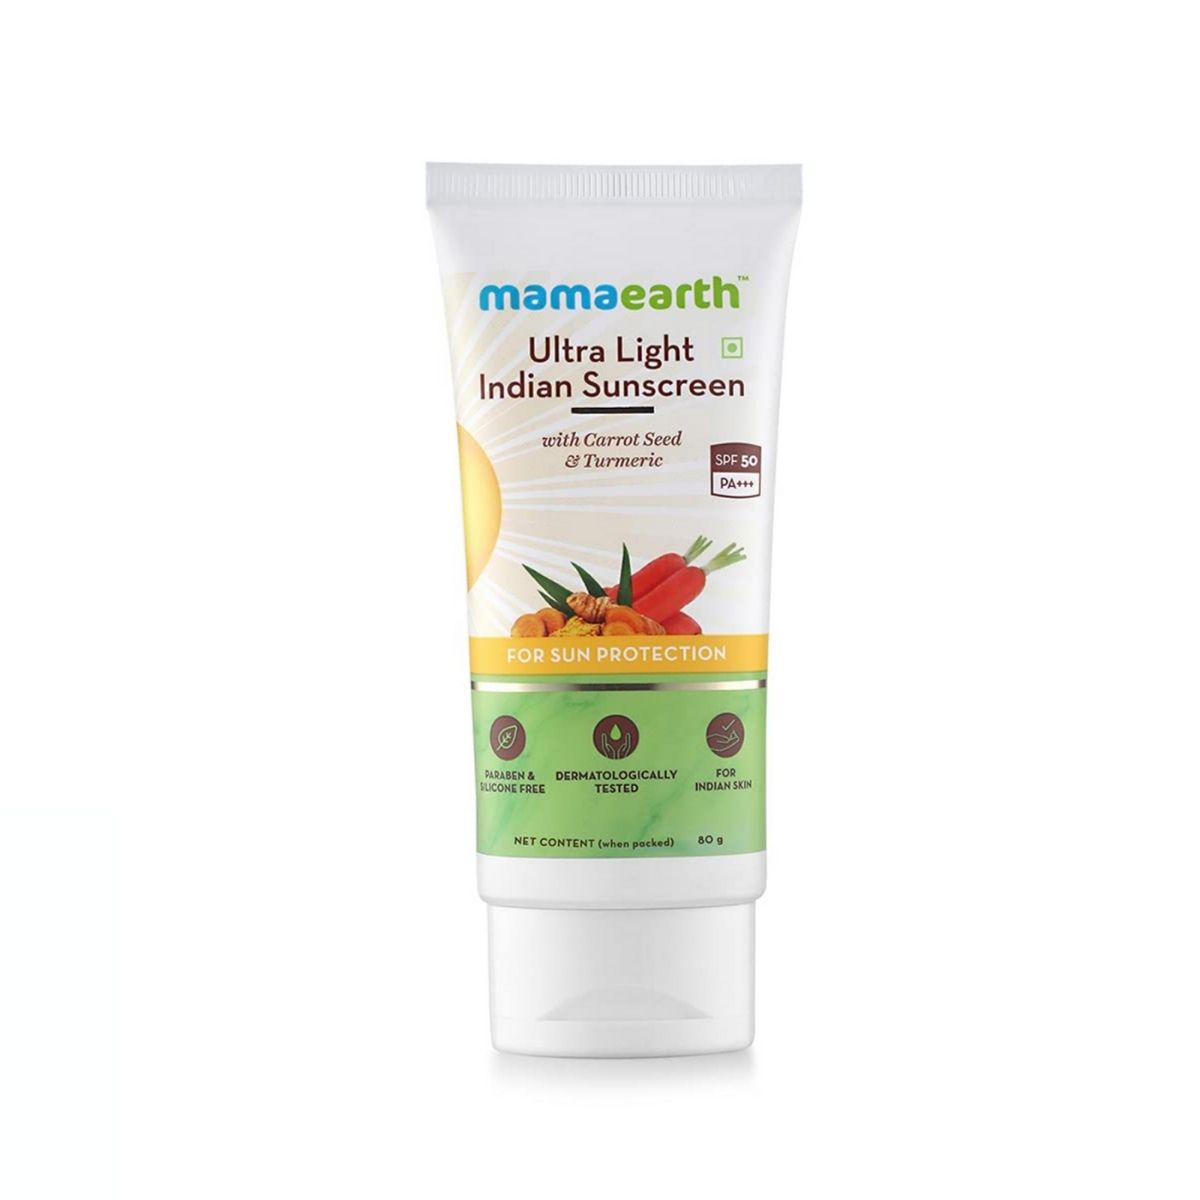 Mamaearth Ultra Light Indian Sunscreen with Carrot Seed & Turmeric - 80g